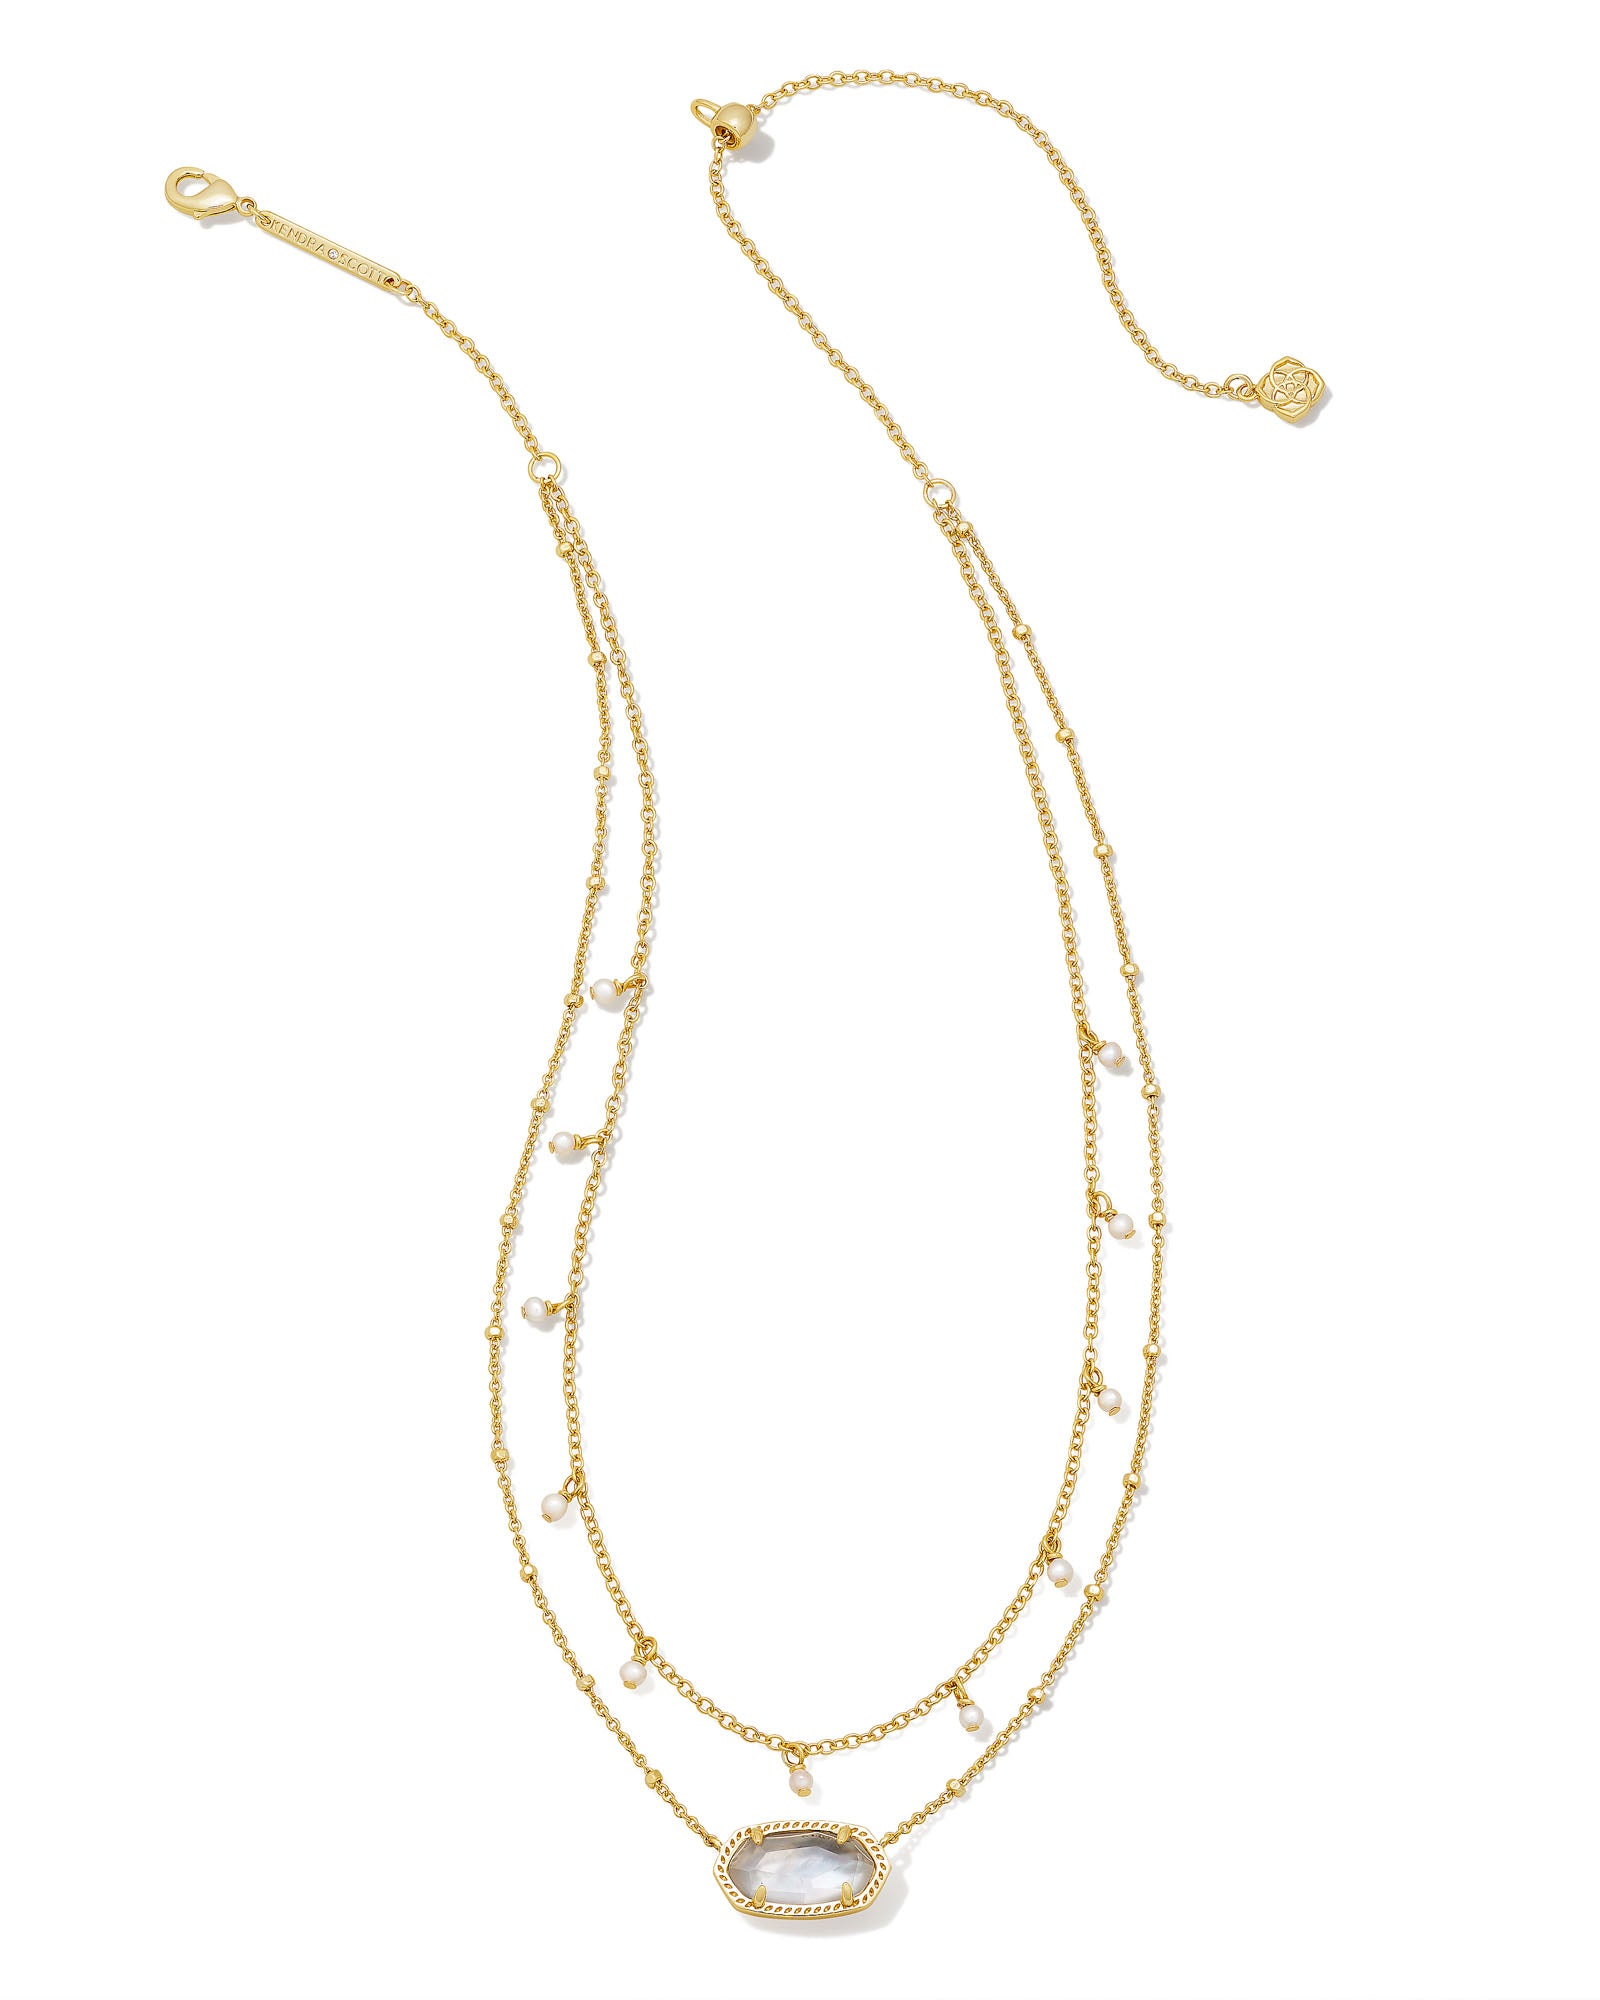 ELISA PEARL MULTI STRAND NECKLACE GOLD IVORY MOTHER OF PEARL